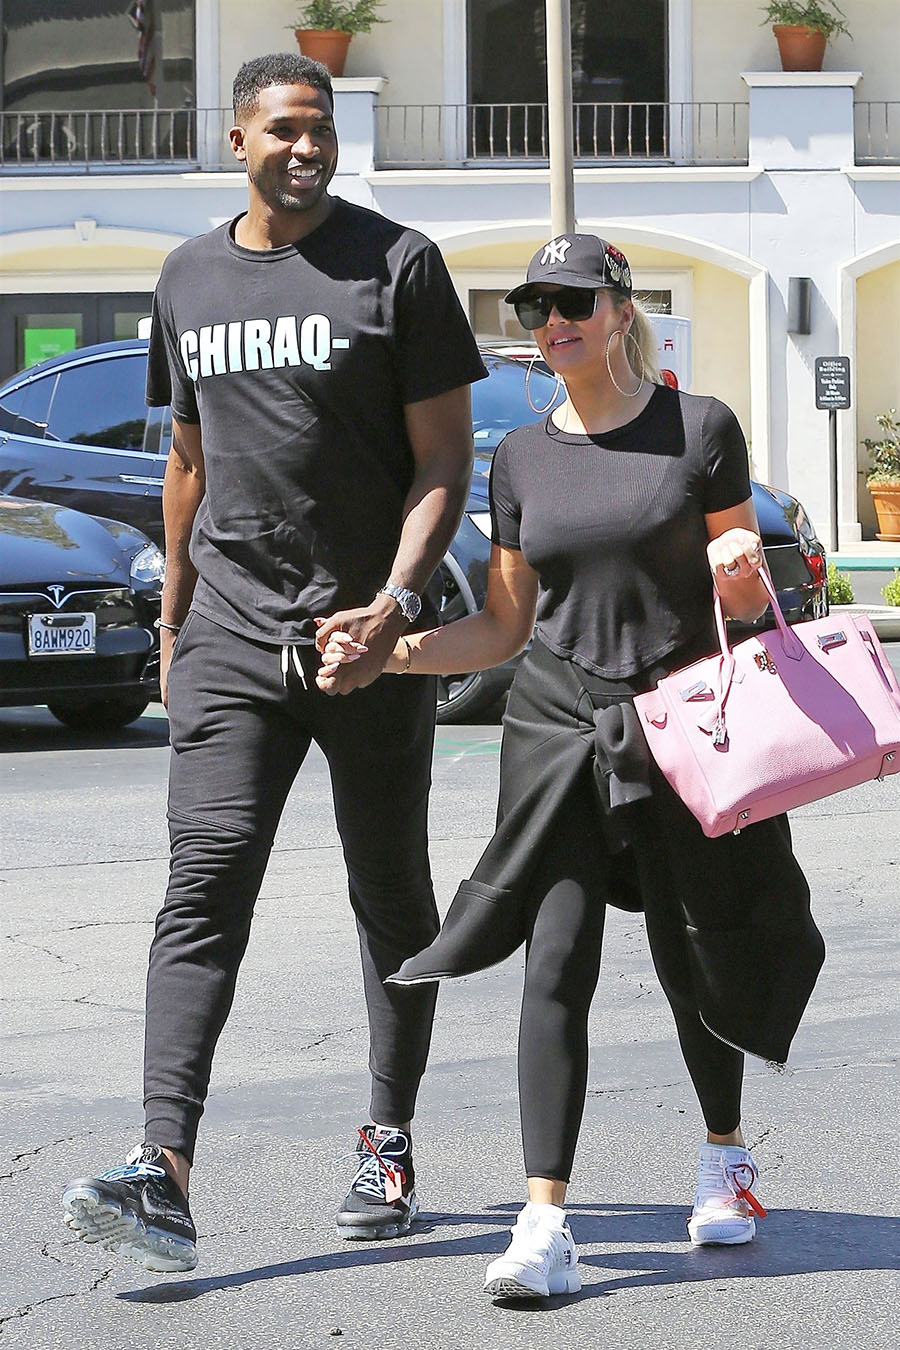 Khloe Kardashian Wants Her Fiancé Tristan Thompson To Stop Overspending On Luxury Items And Cars